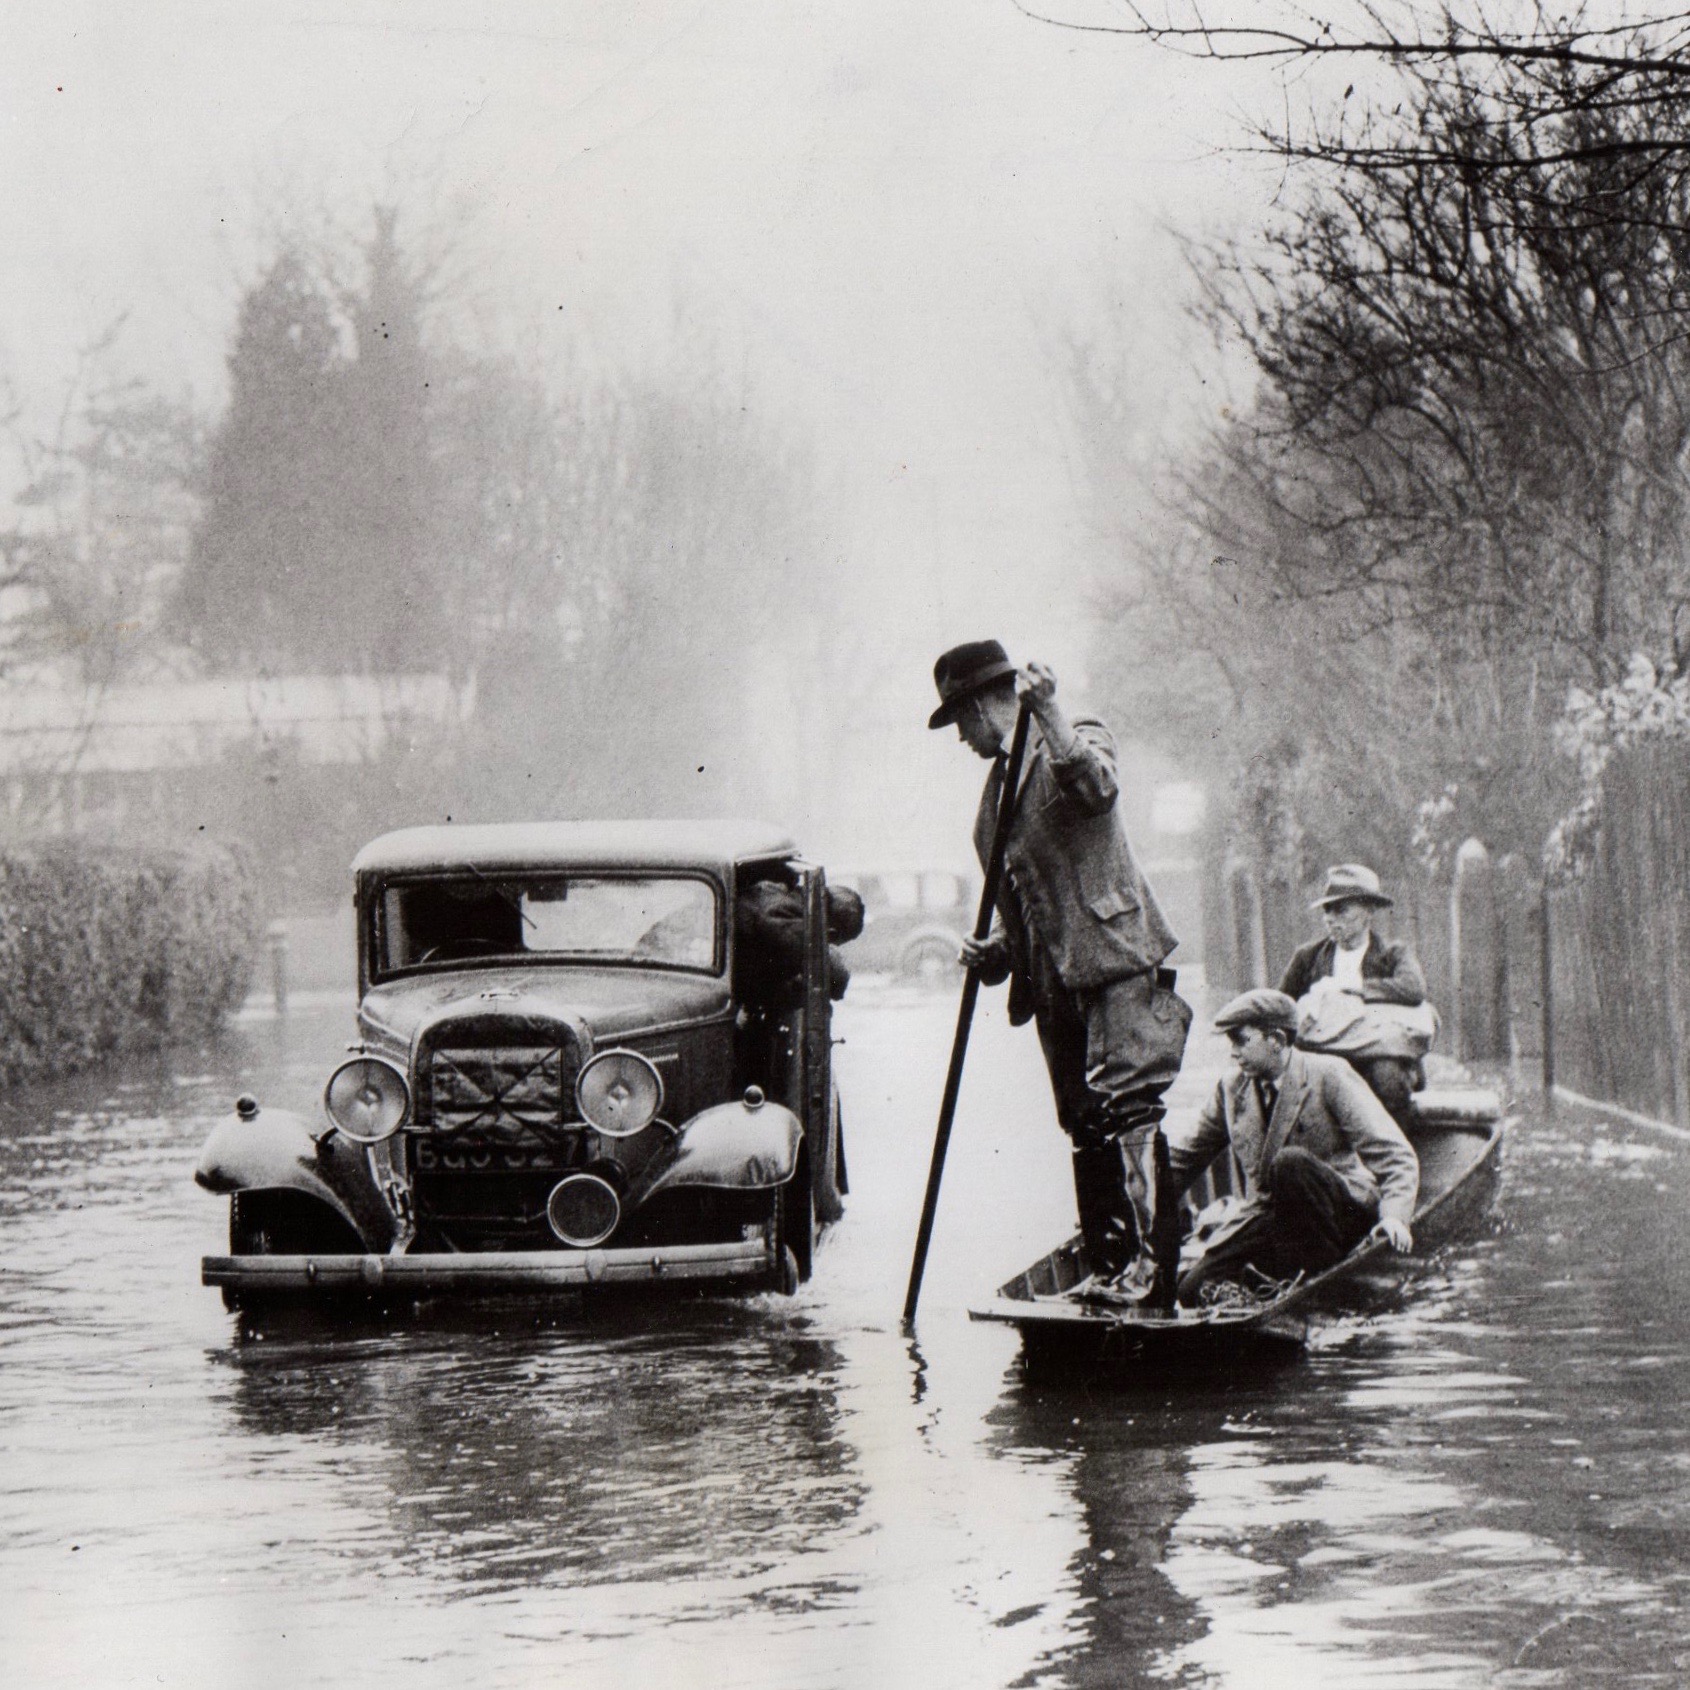 Thames Valley flooding in the 1930's